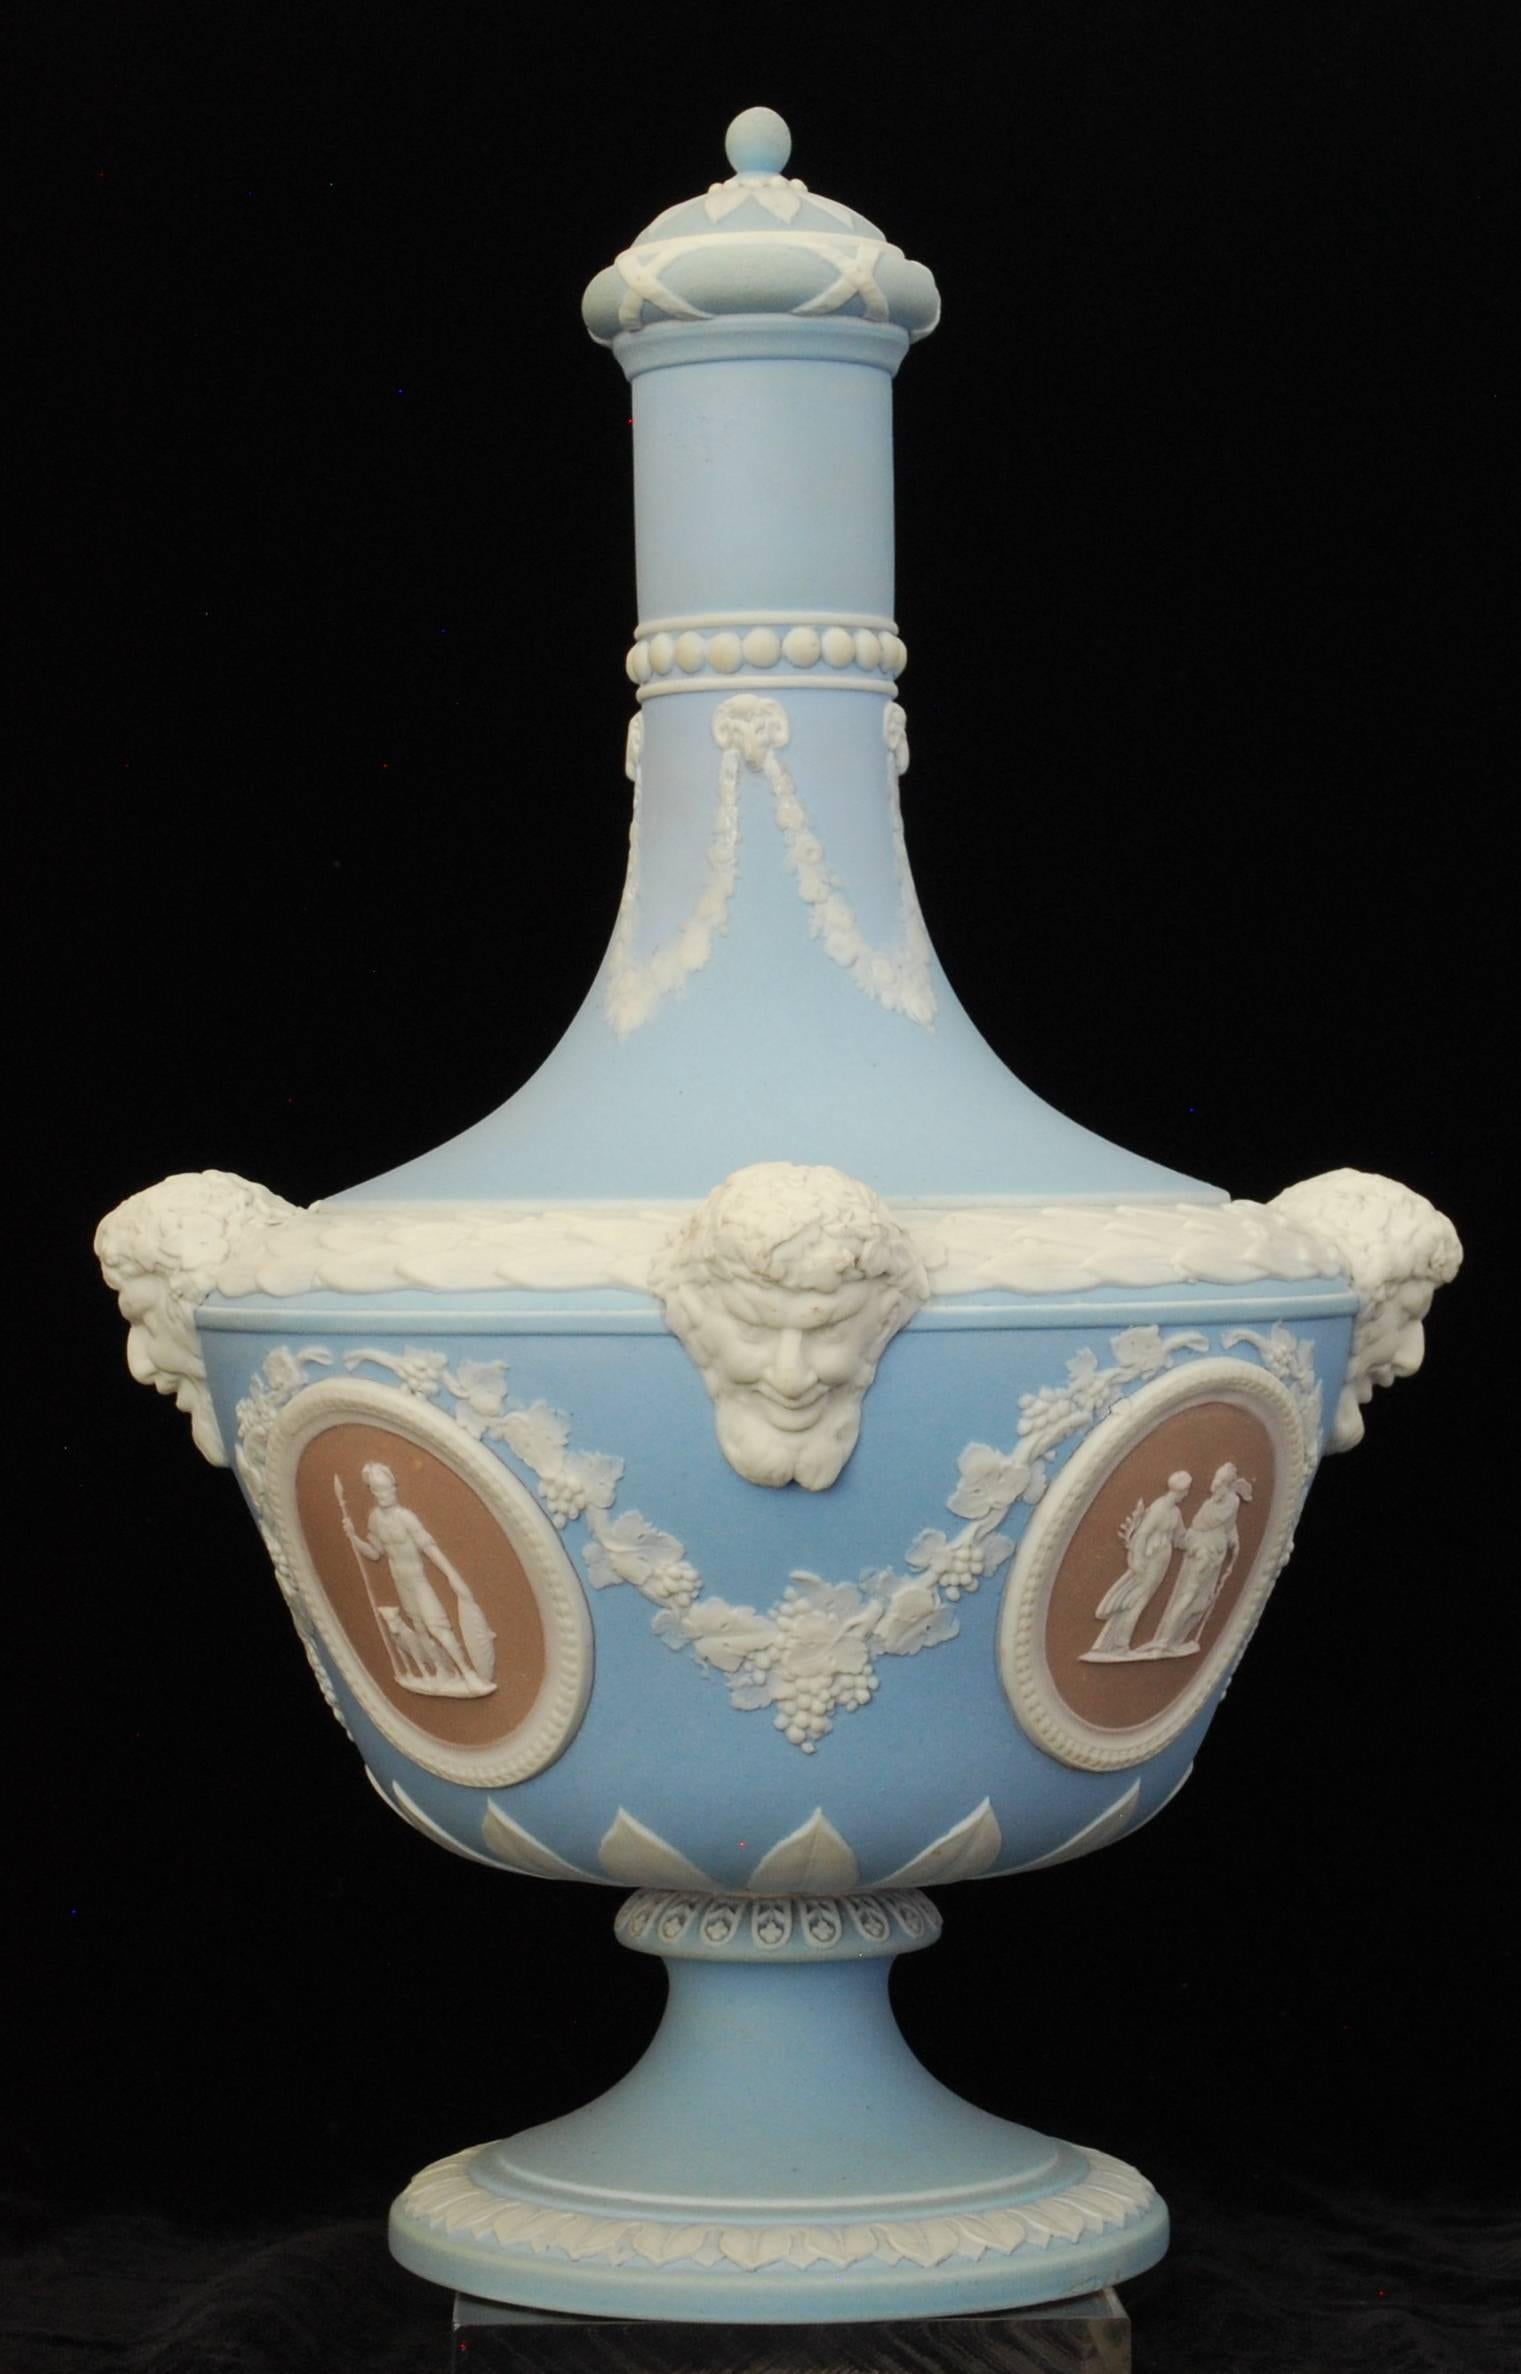 Vase in the ‘Barber Bottle’ shape, in old pale blue with lilac medallions showing Aesculapius & Hygeia, Fame inscribing a vase to Elisabeth, Abundantia, and Mars (God of War).